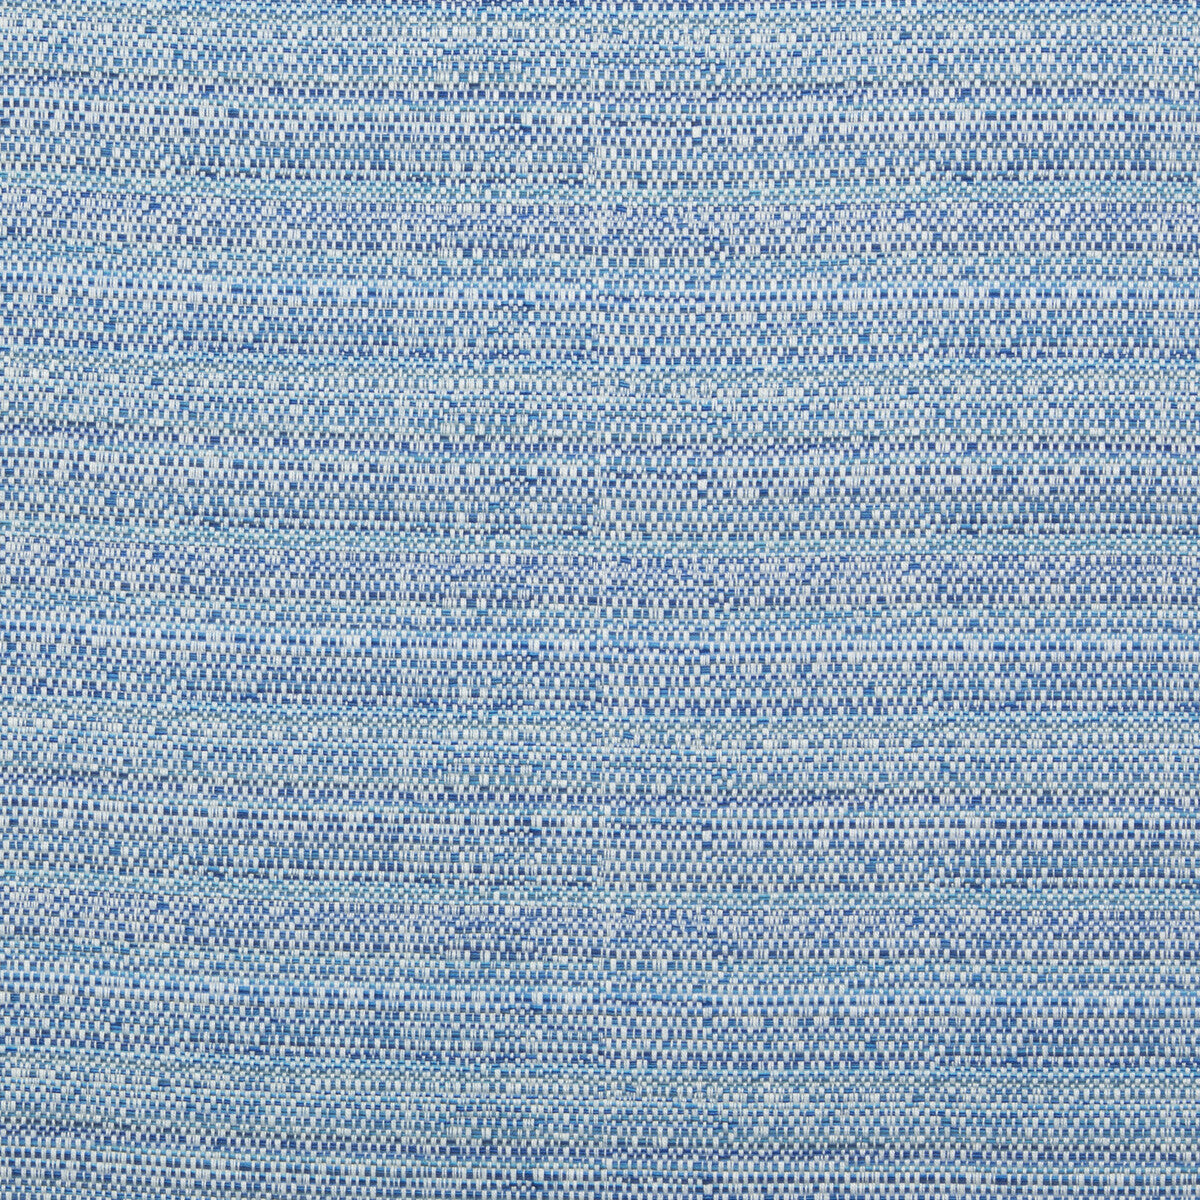 Melanger fabric in maritime color - pattern 31695.515.0 - by Kravet Couture in the Echo Indoor Outdoor Ibiza collection